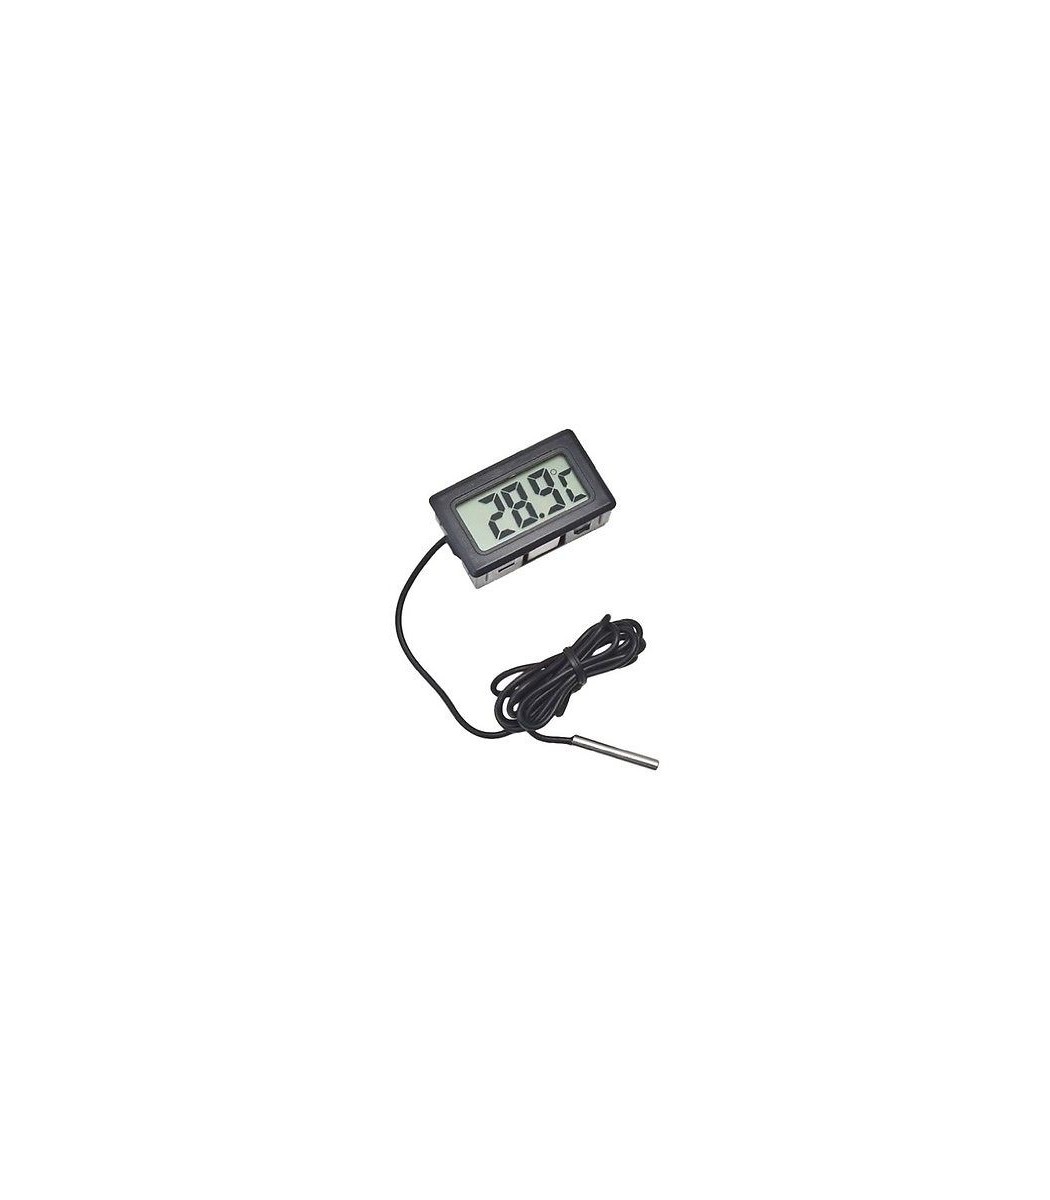 LCD panel thermometer TH001